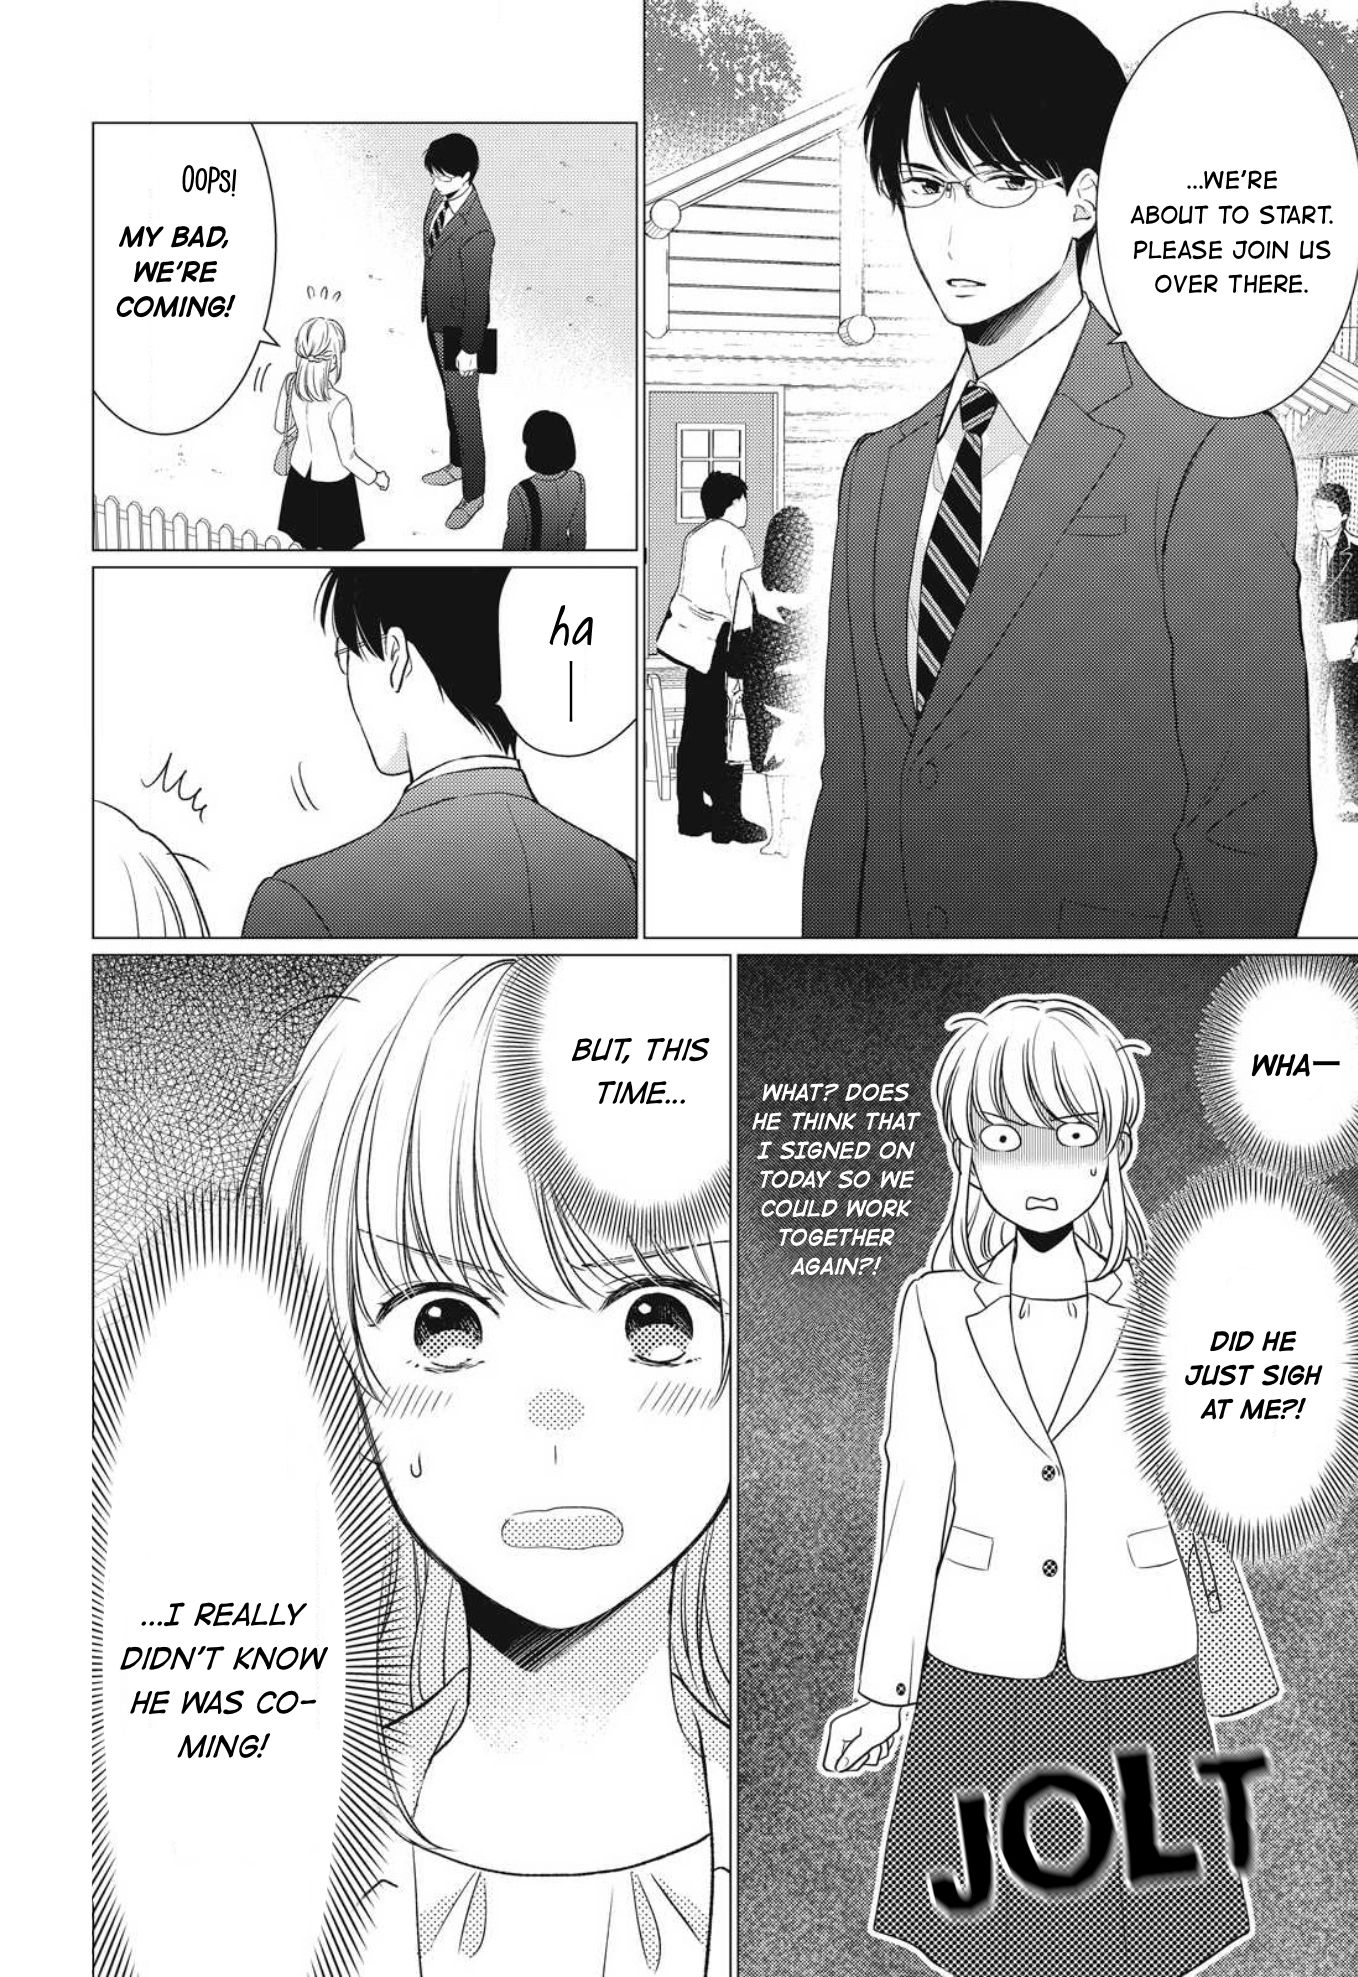 Hana Wants This Flower To Bloom! - chapter 6 - #4